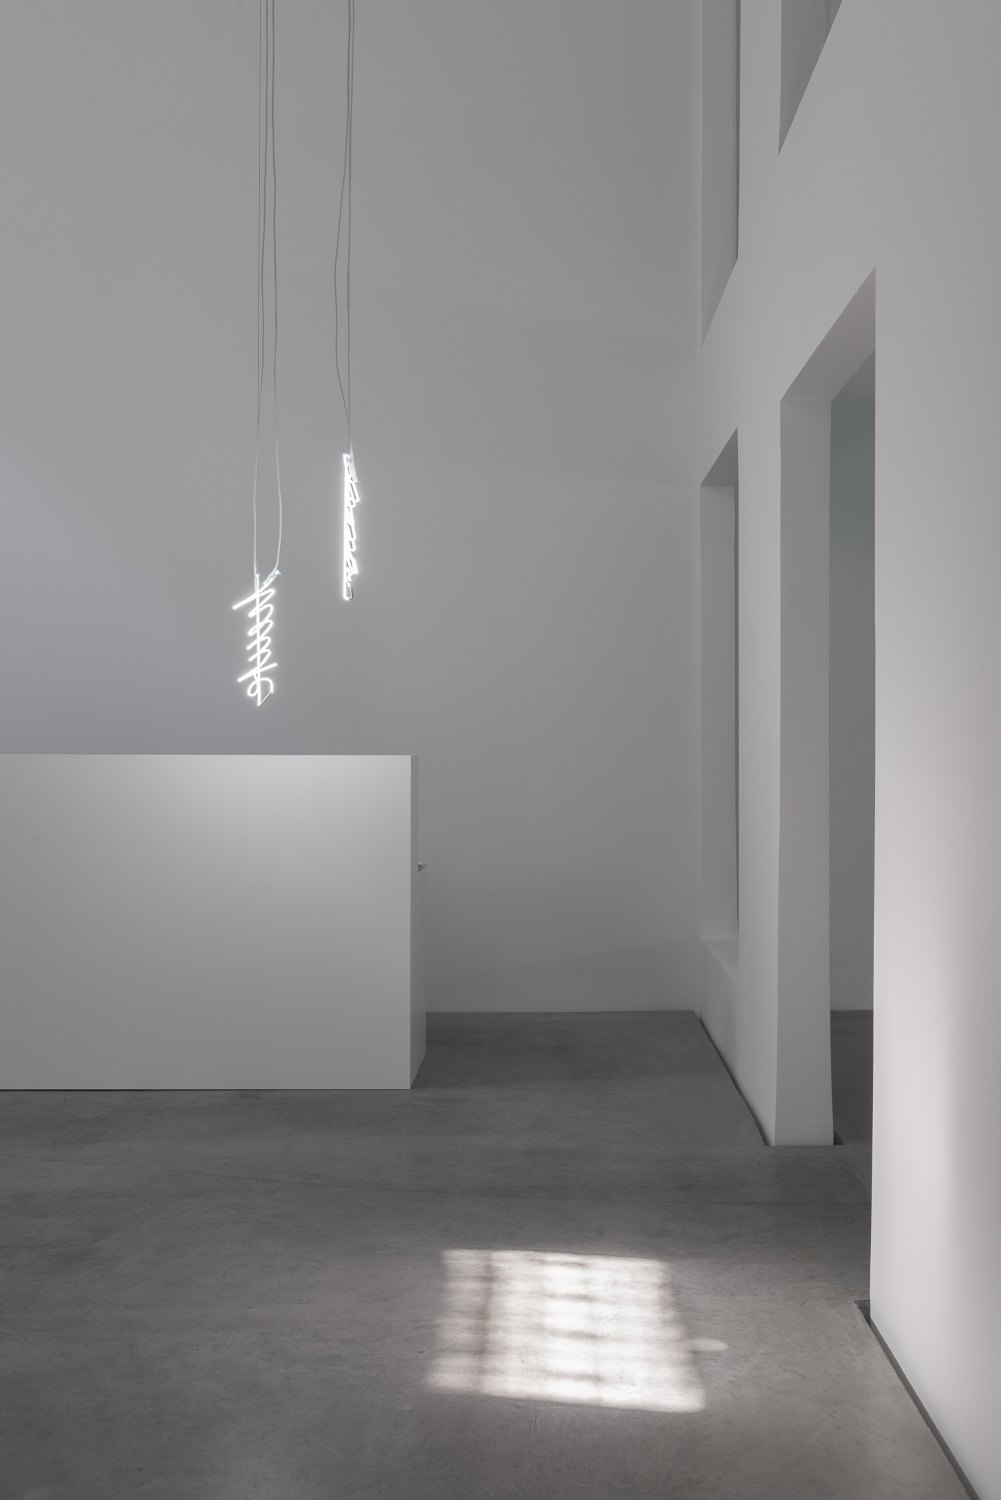 Cerith Wyn Evans 'L=U=M=E=N' After H.D., 2016 (installation view) Neon (white), transformers, 1mm stainless steel cable, wire 47 x 14,5 x 6 cm 